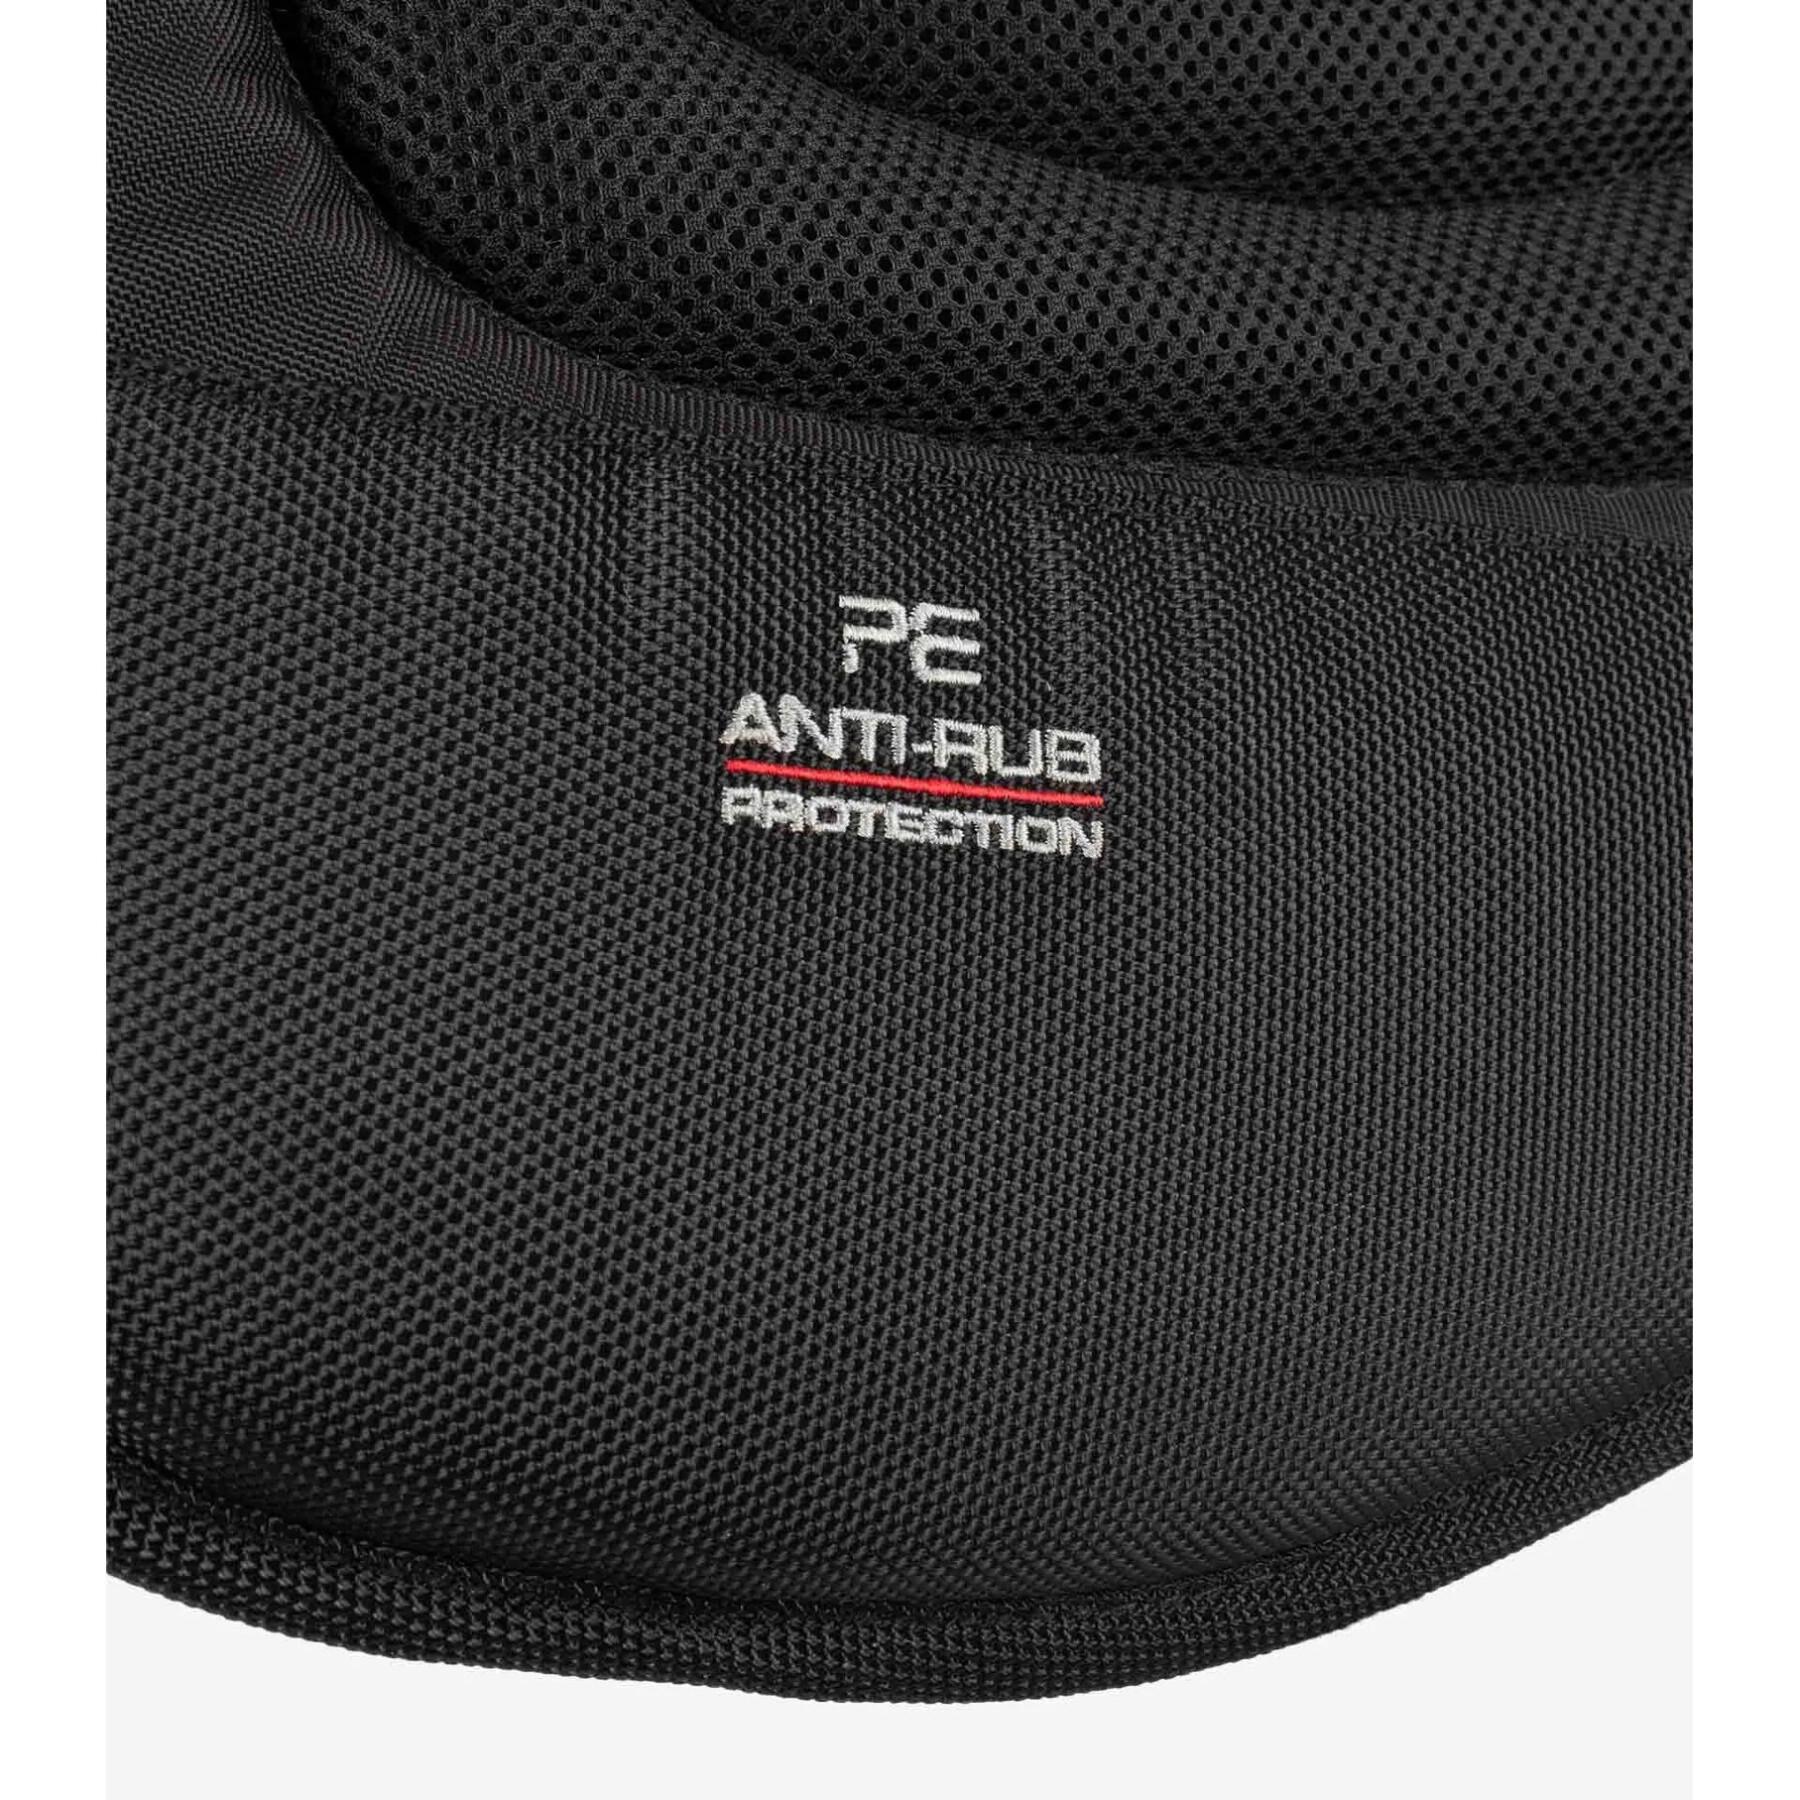 Anti-slip and anti-shock saddle pad for horses running and training Premier Equine Airflow SP